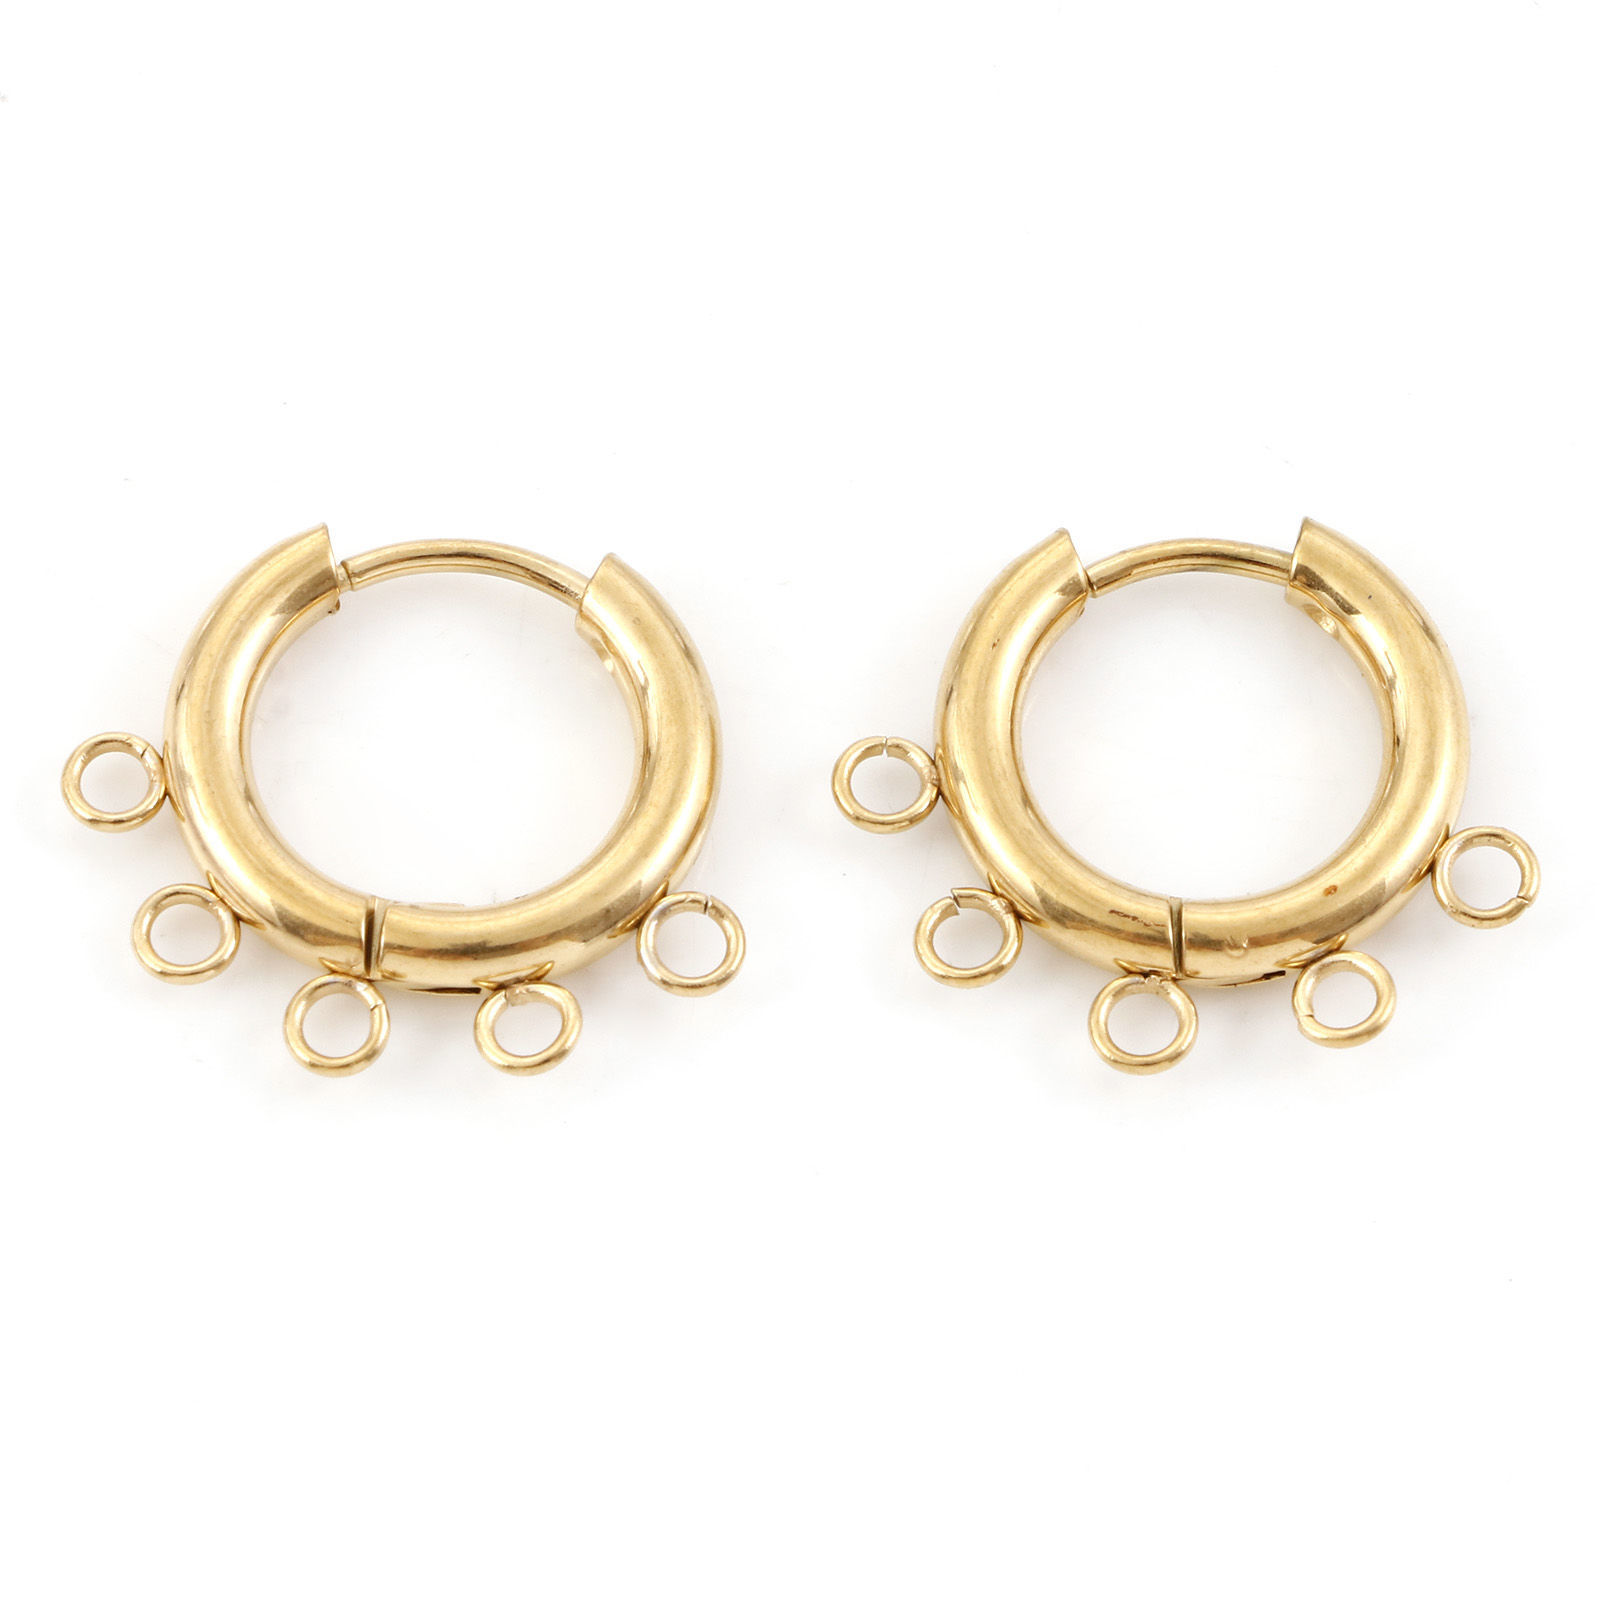 Picture of 304 Stainless Steel Hoop Earrings Round Gold Plated With Loop 20mm x 18mm, Post/ Wire Size: (18 gauge), 1 Pair